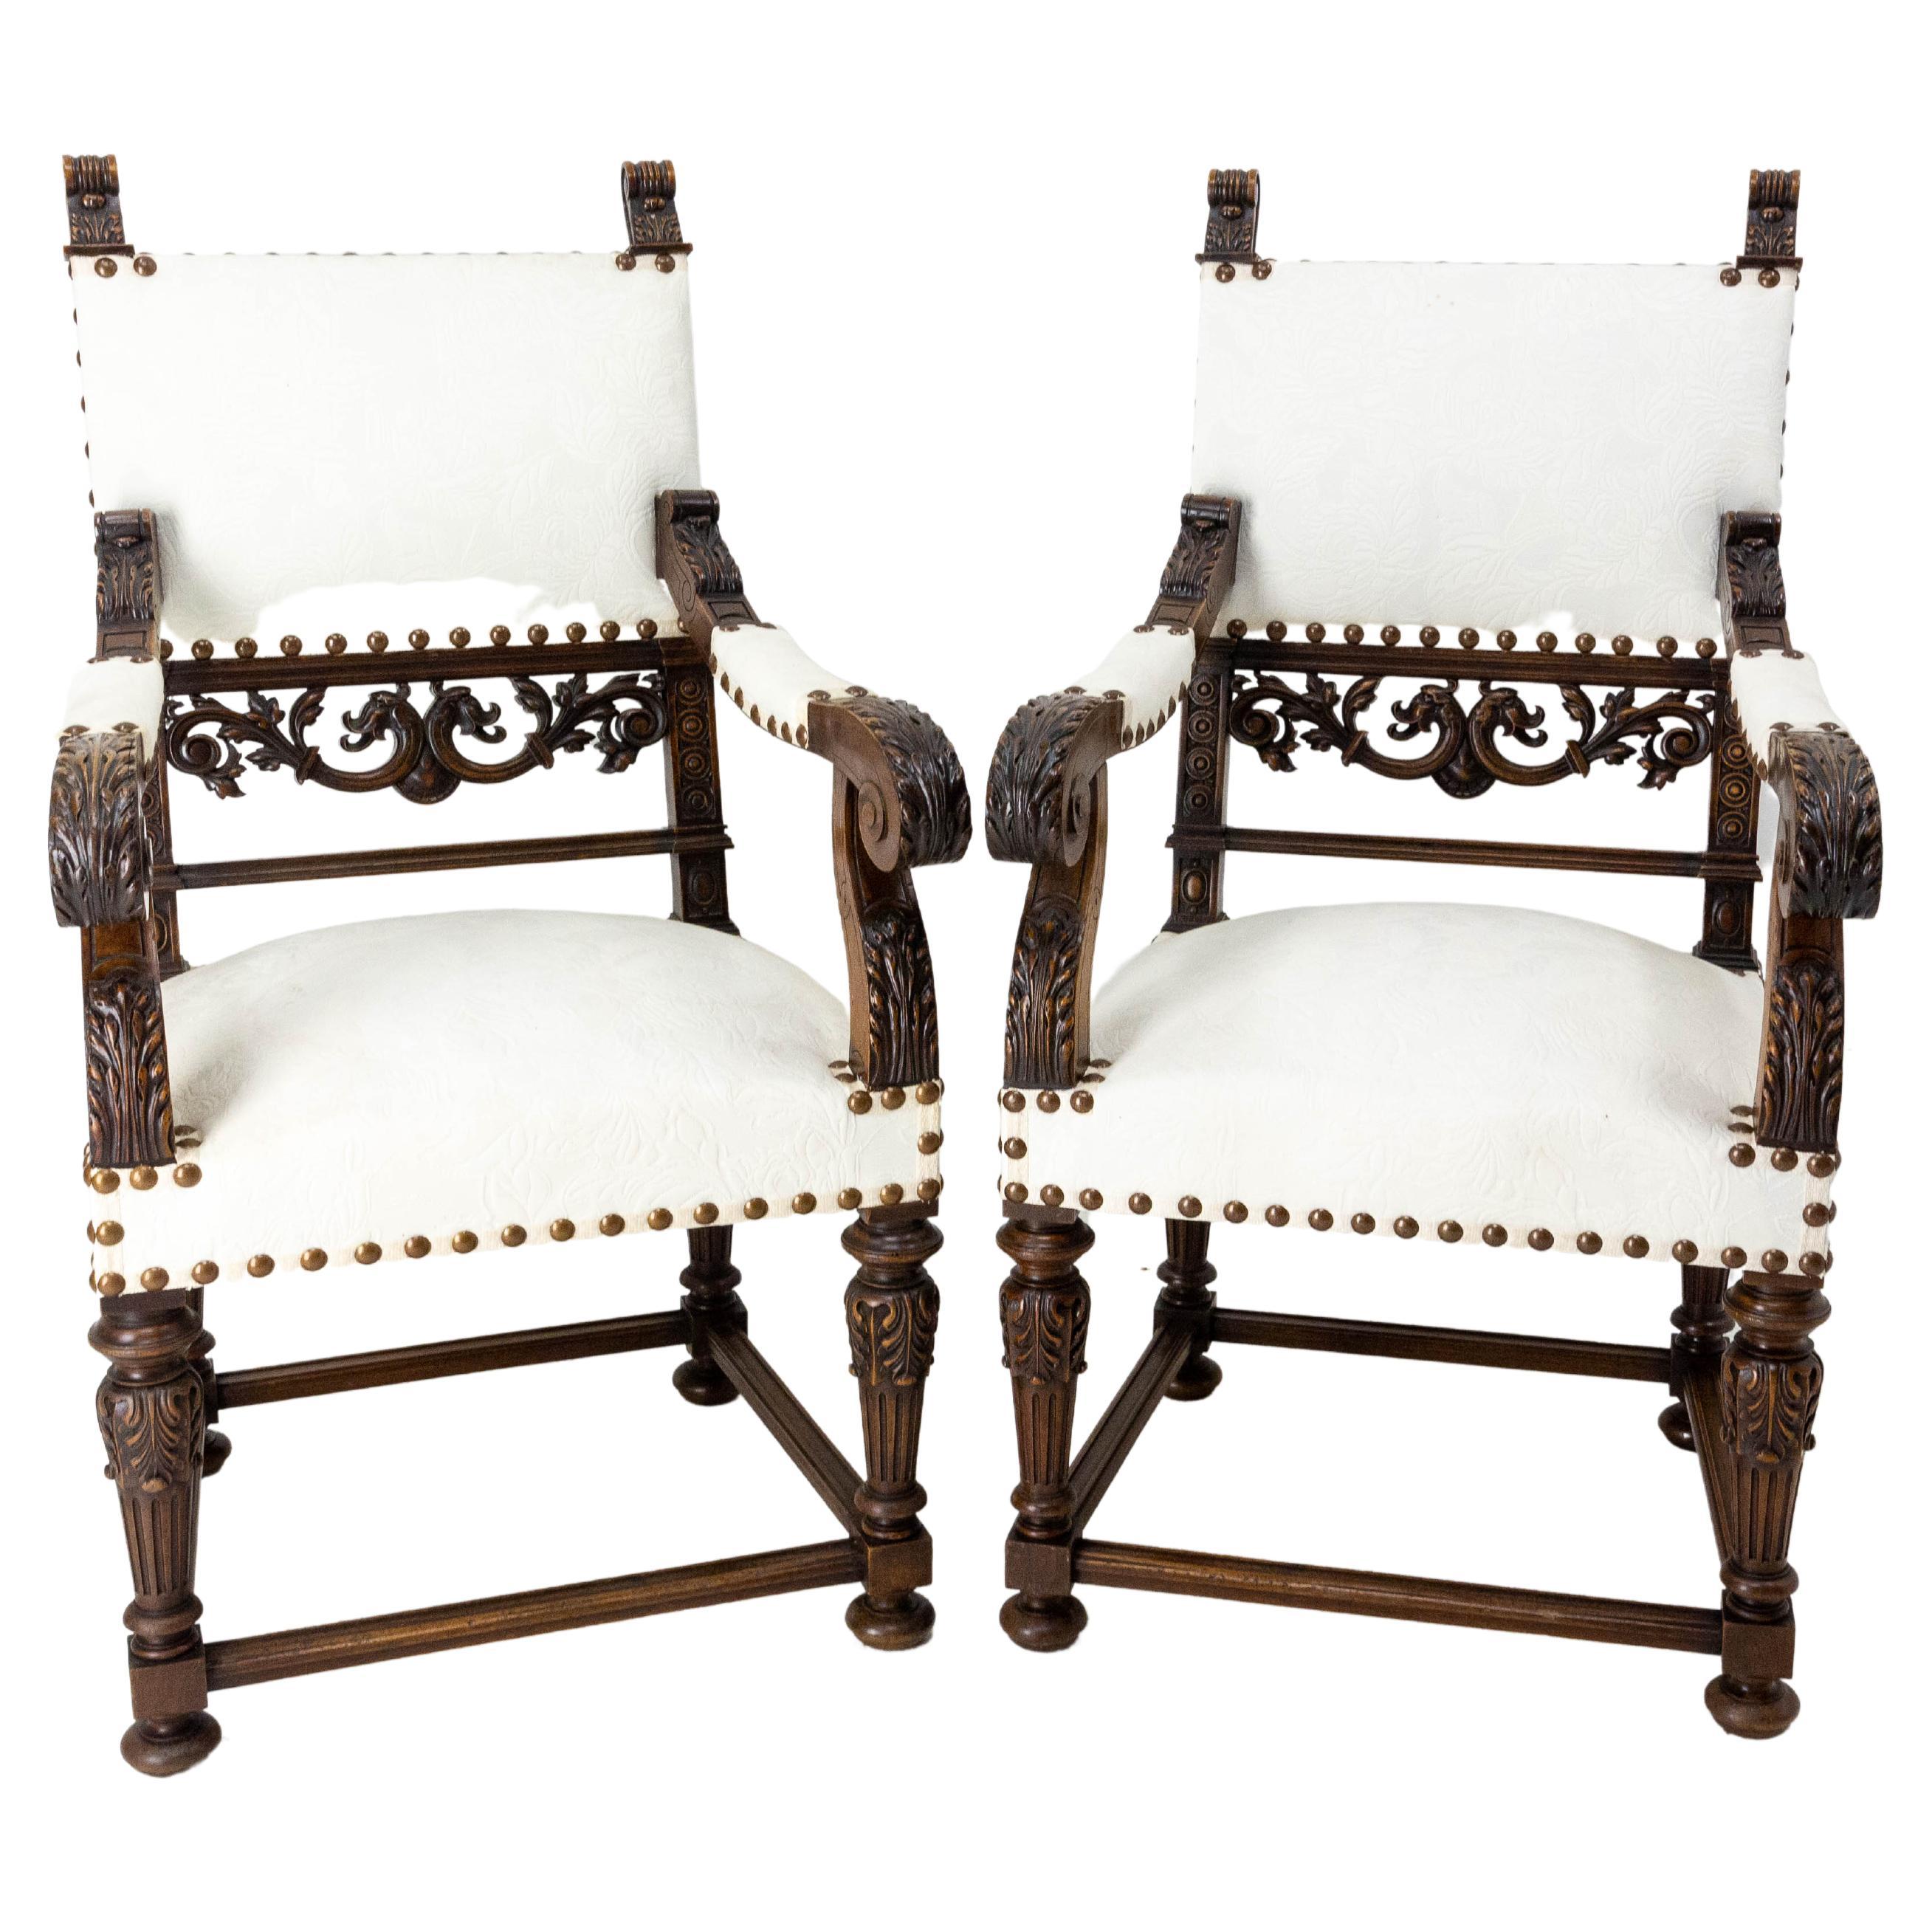 Pair of Louis XIII Revival Open Walnut Armchairs French, 19th Century to Recover For Sale